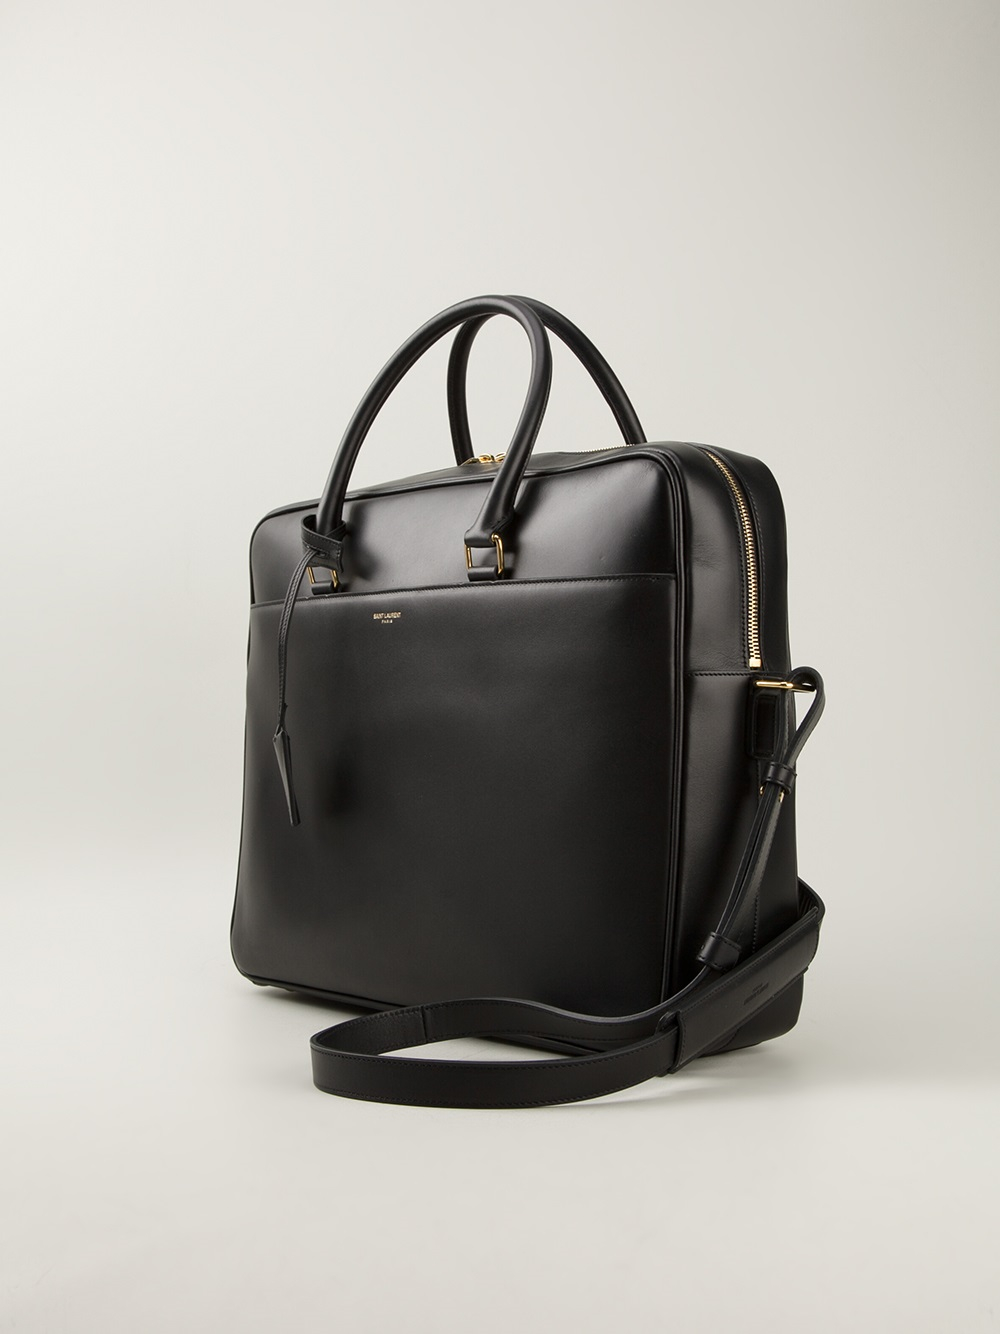 Lyst - Saint Laurent Small Classic Duffle Briefcase in Black for Men